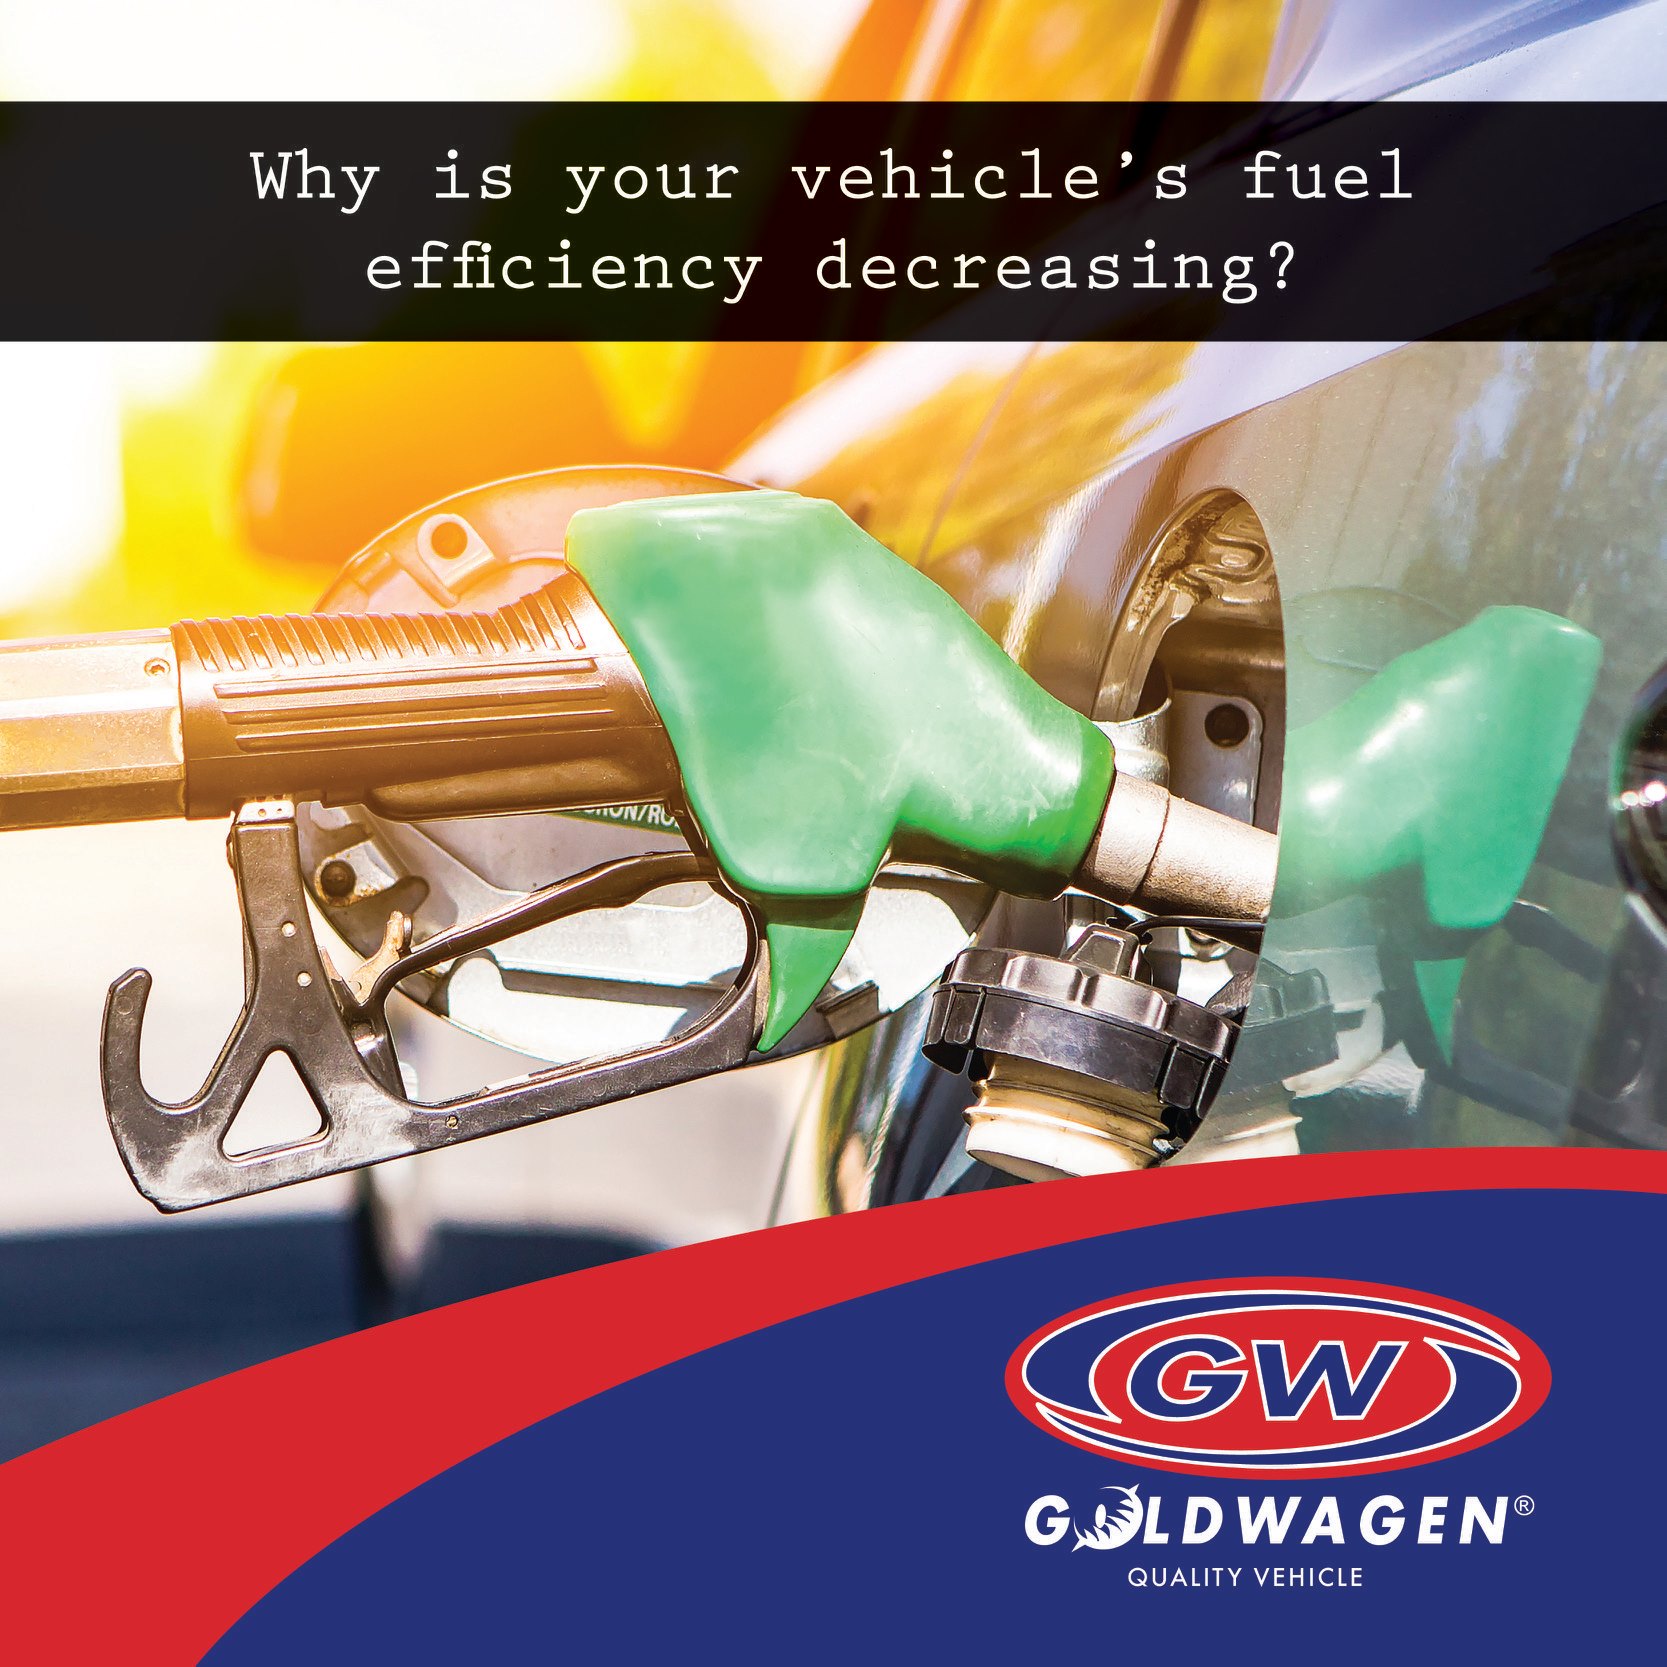 Why is your vehicle’s fuel efficiency decreasing?